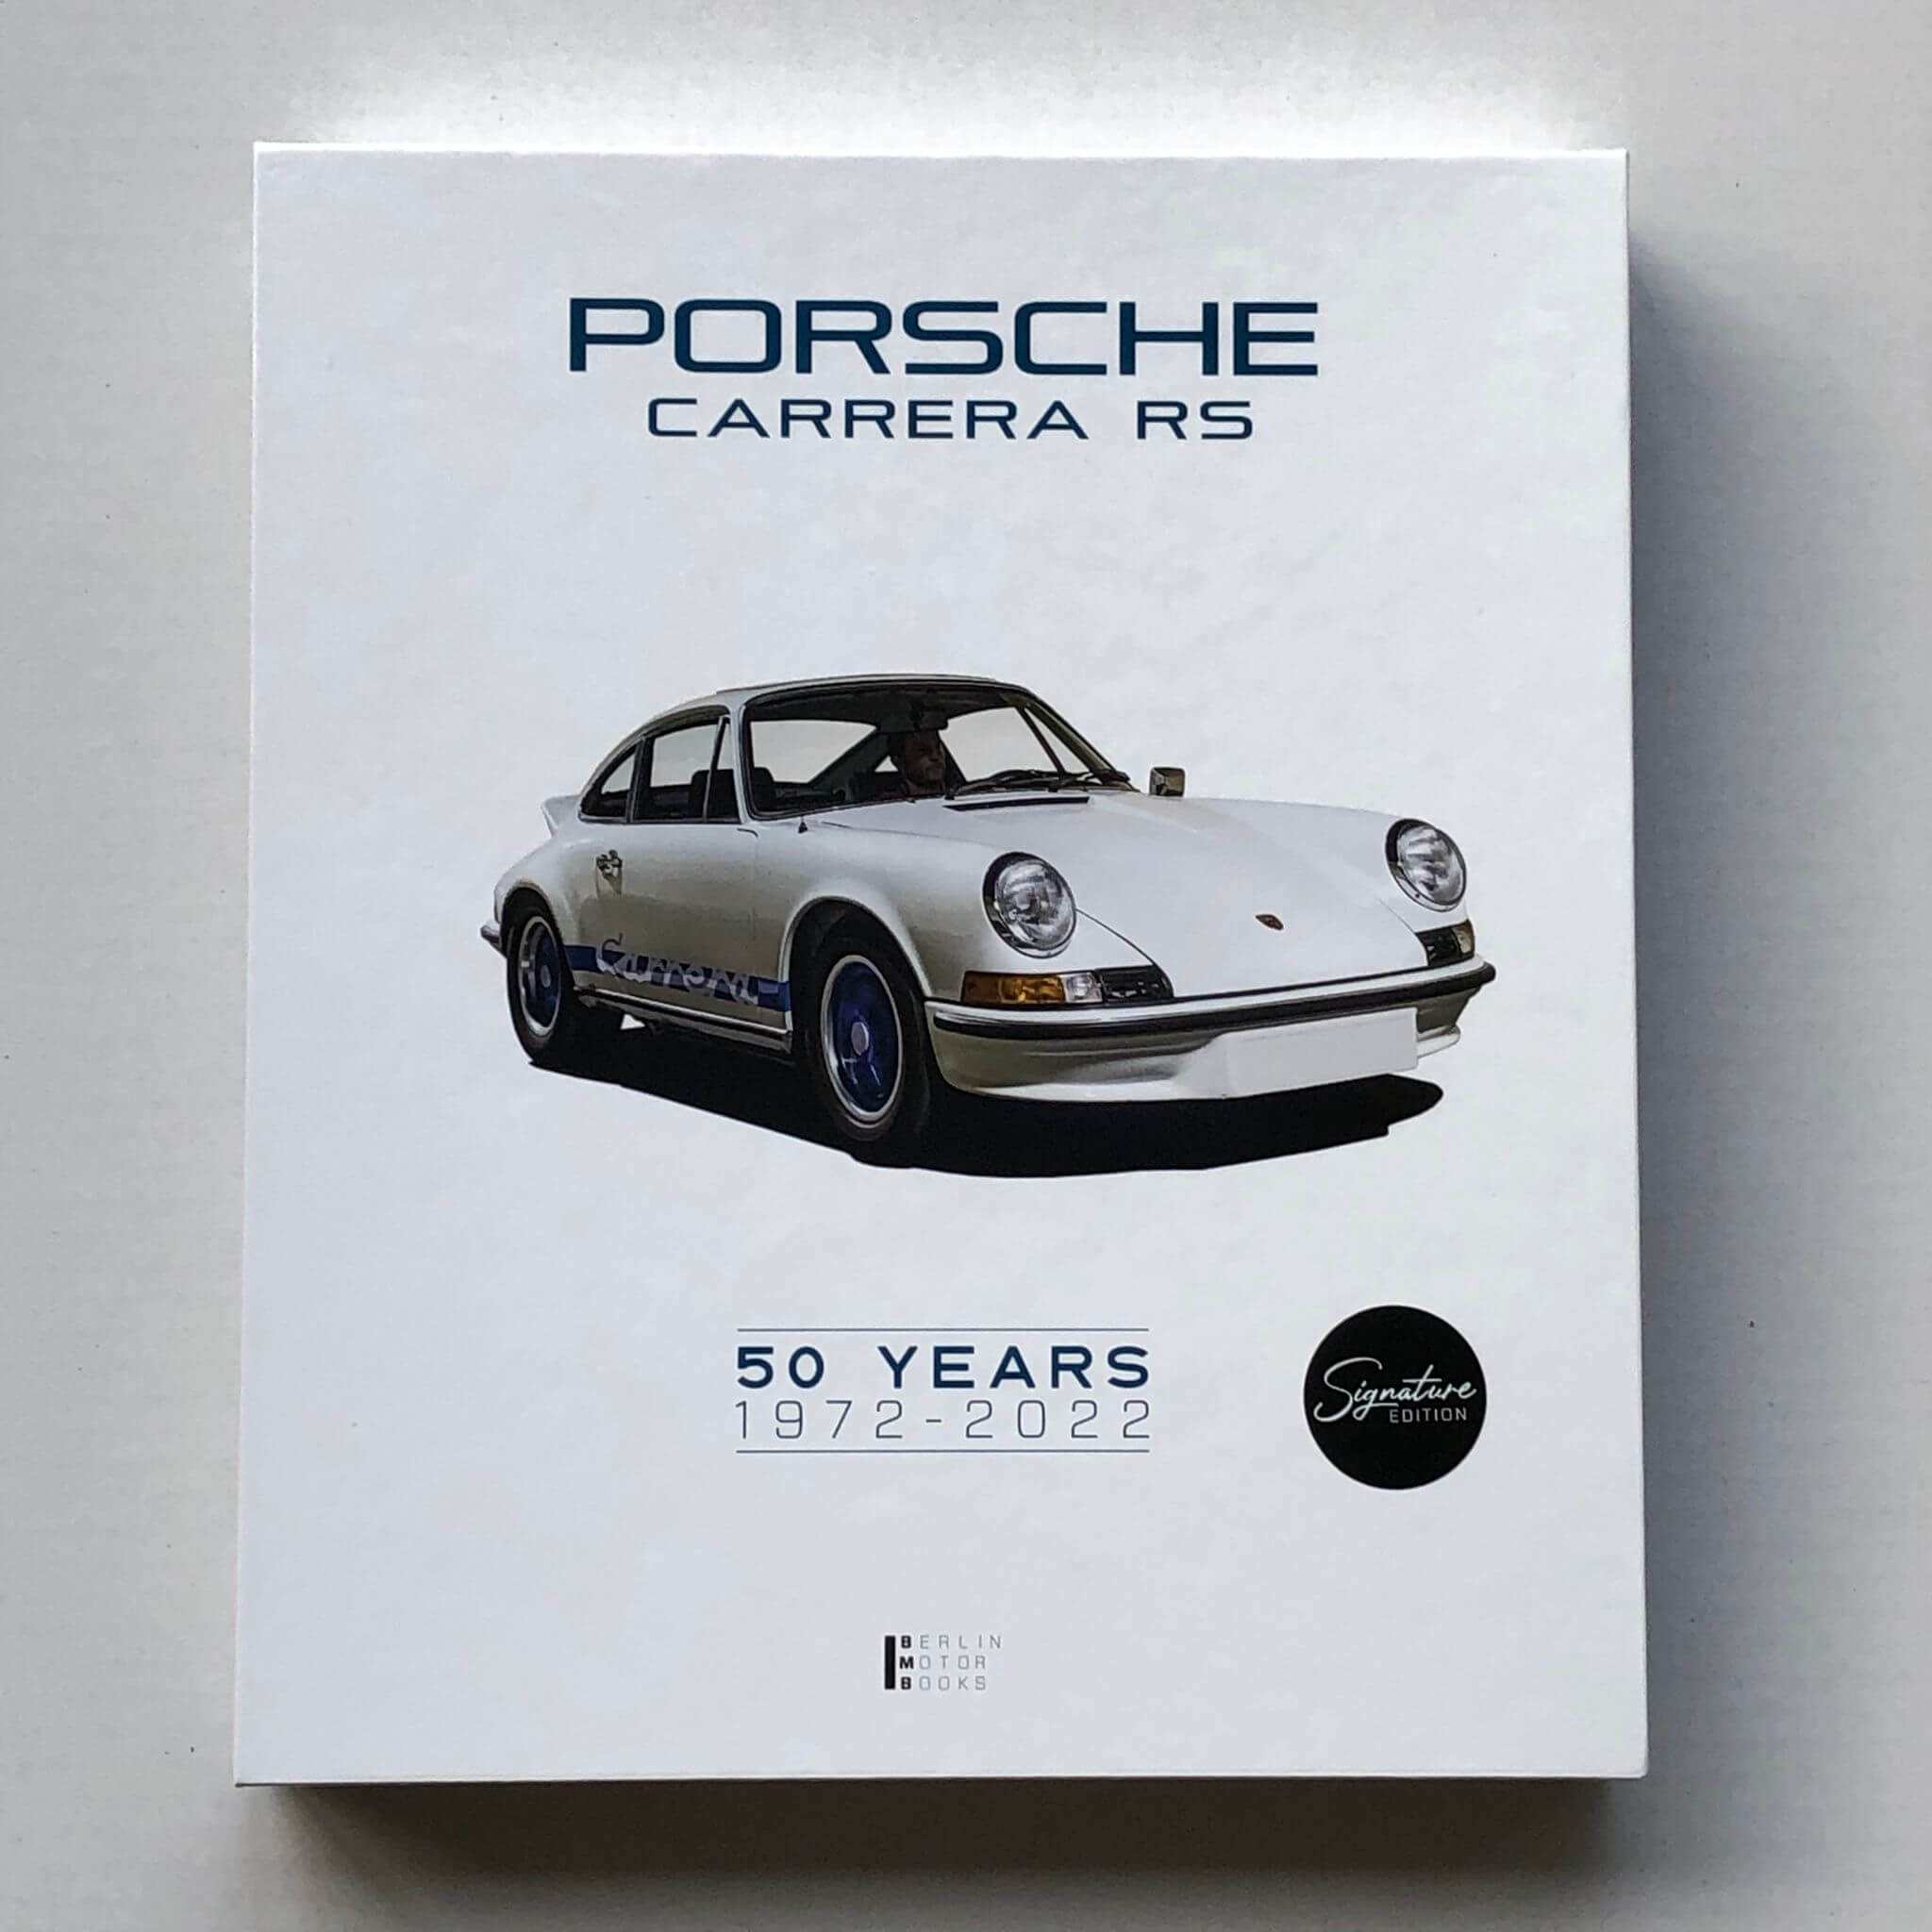 Porsche Carrera RS Book - 50 YEARS „Signature Edition“ with Roland Kussmaul  – Berlin Motor Books